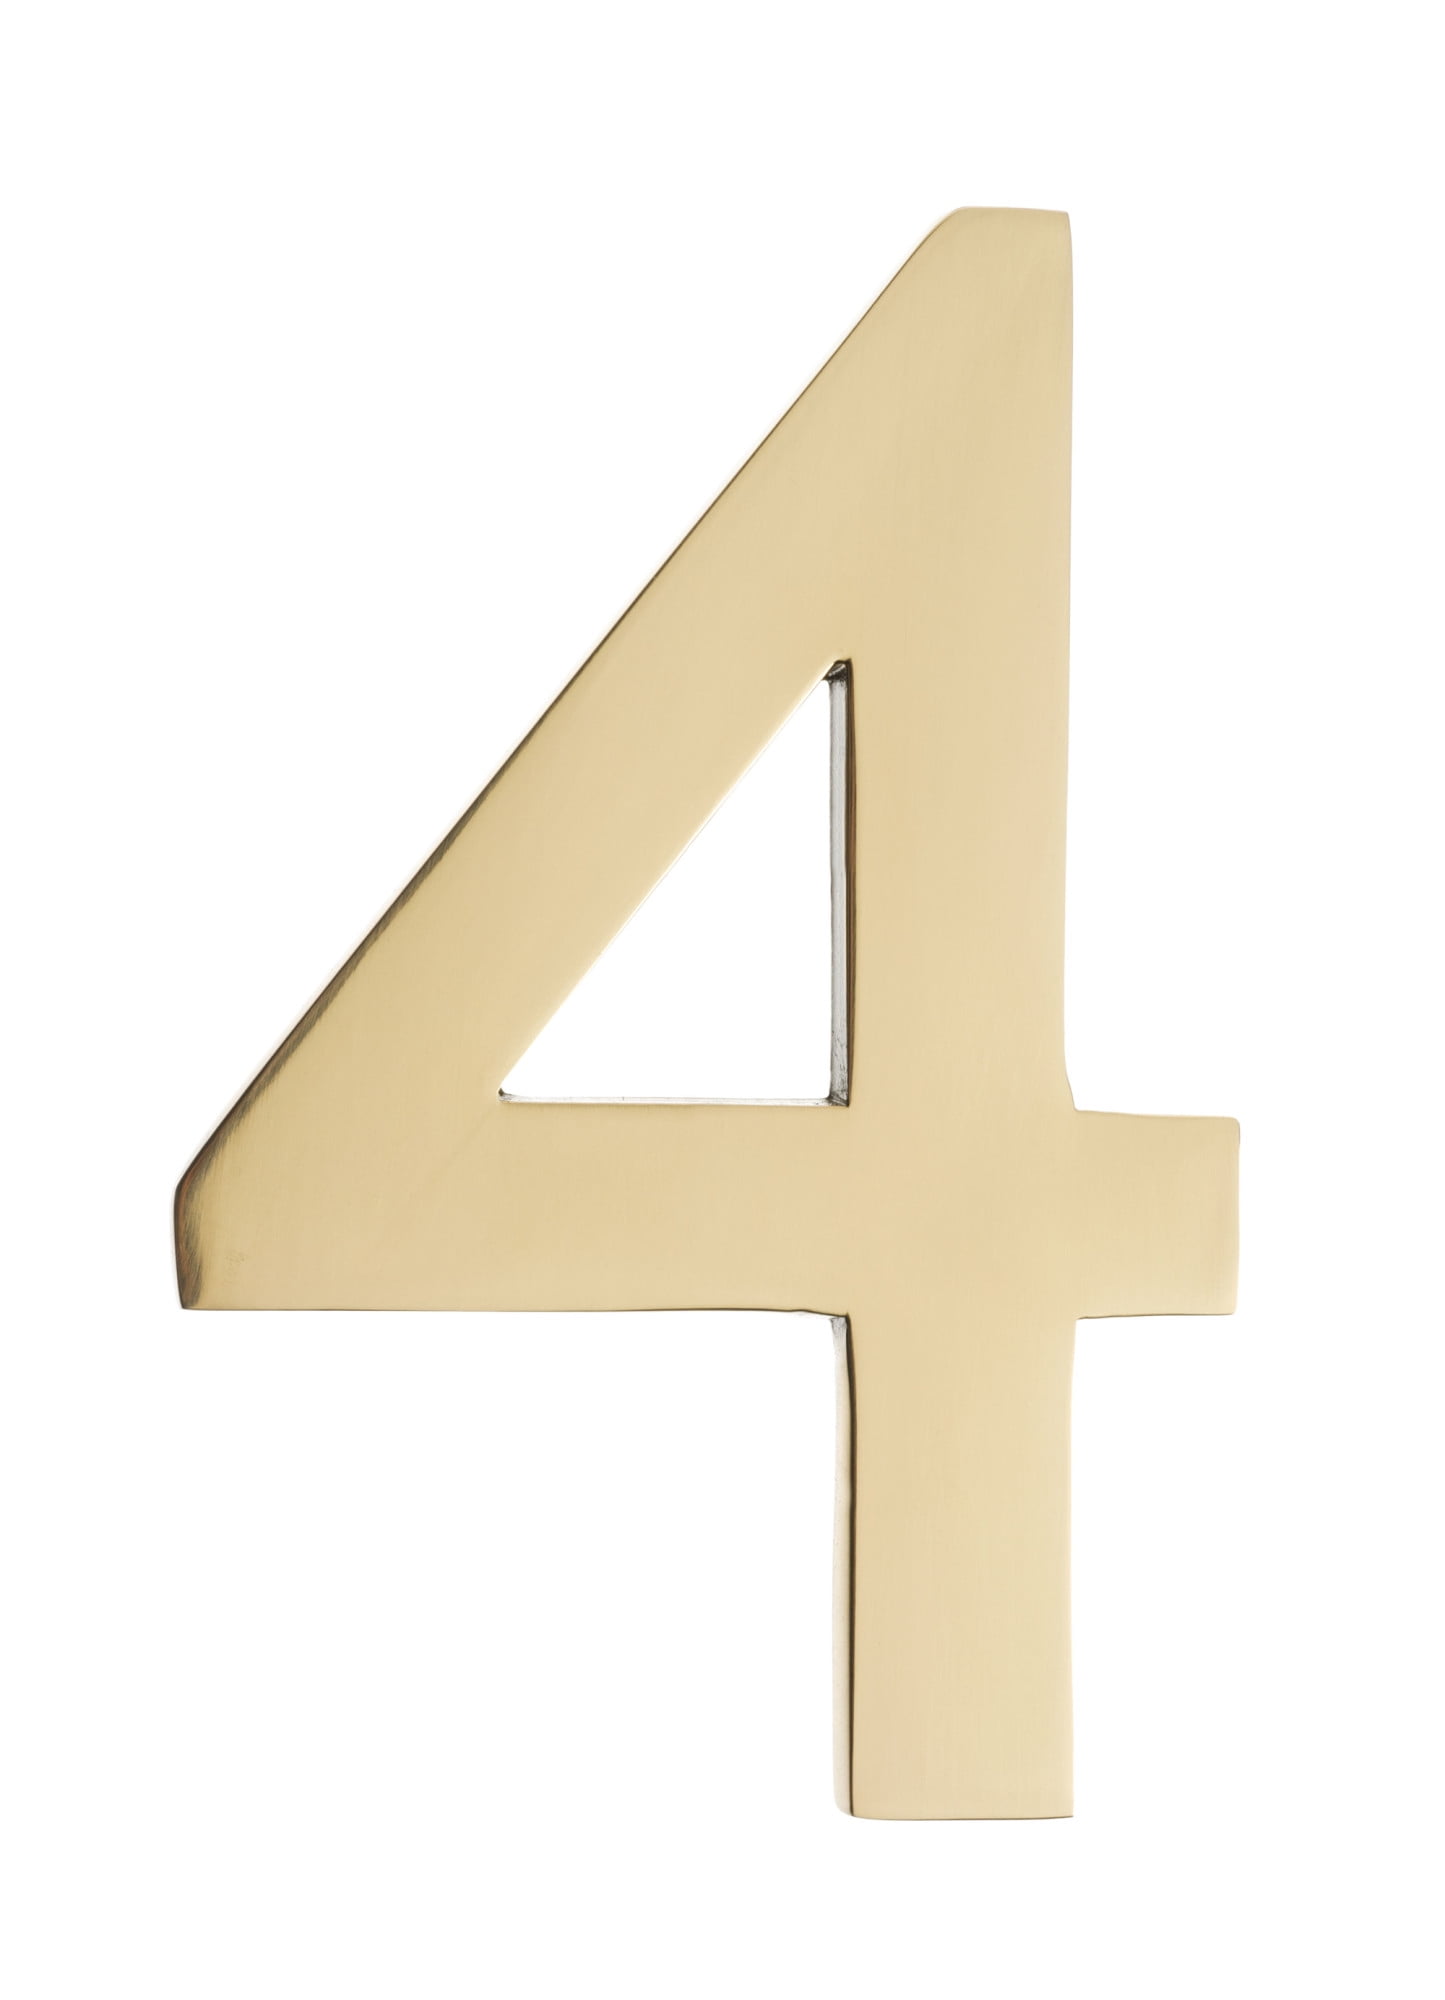 3582pb-4 Floating House Number 4, Polished Brass - 4 In.